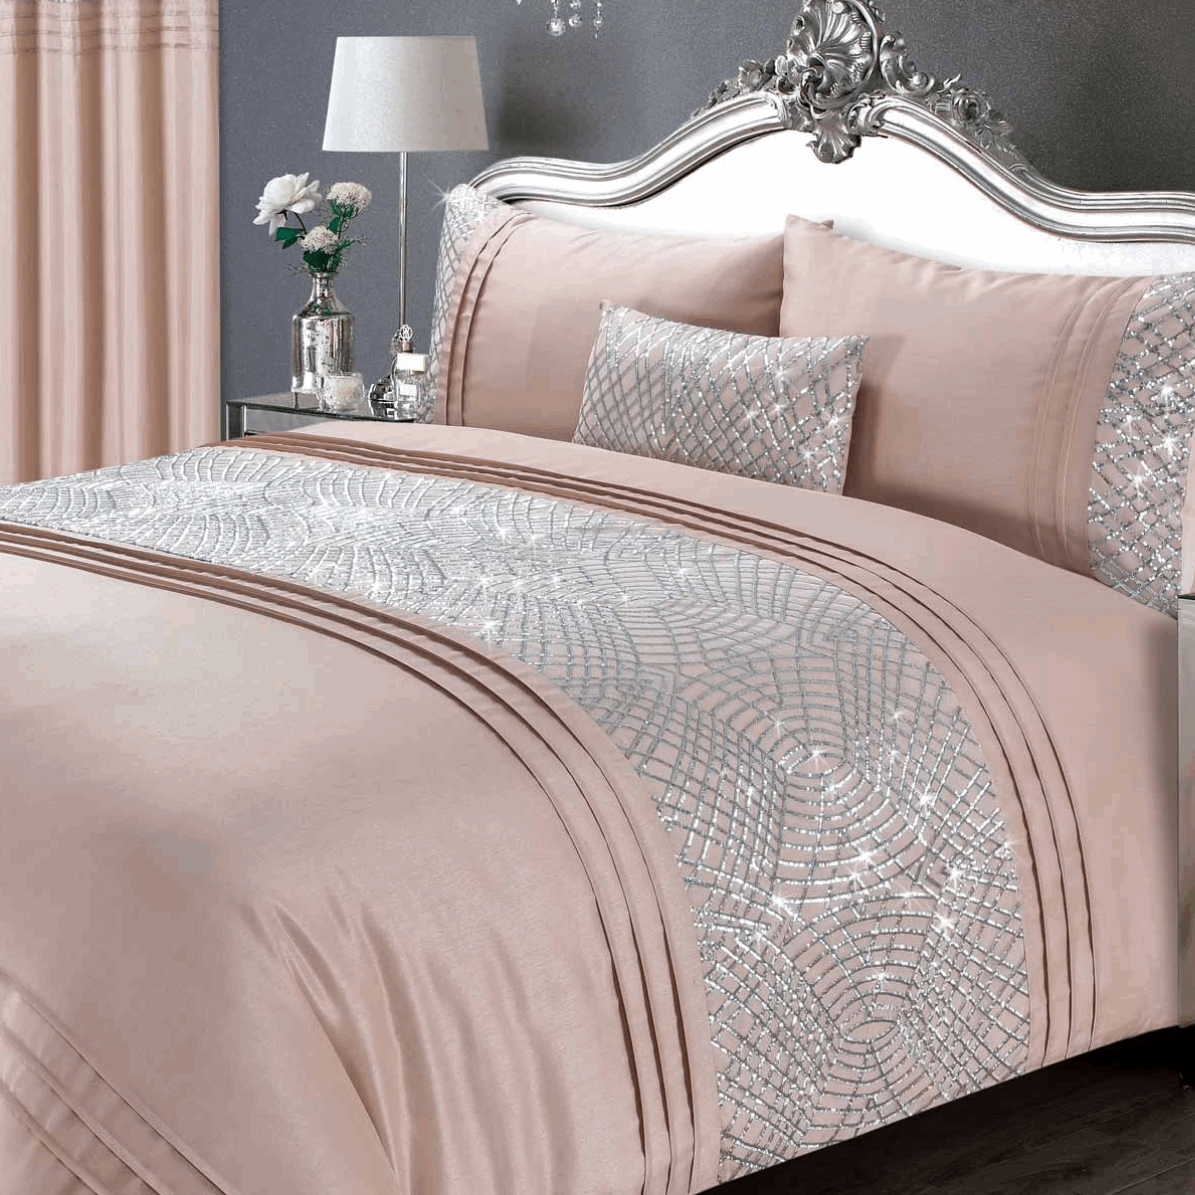 These glitzy Charleston duvet covers have been beautifully made from a blush pink satin fabric featuring a geometric glitter sparkle band across the duvet and down each pillowcase, the perfect addition to any boudoir bedroom. To complete the look, Charleston has a co-ordinating boudoir filled cushion and fully lined curtains.  Product Details  100% Polyester Satin Face Fully machine washable Single sets include one pillowcase Other sized sets include two pillowcases